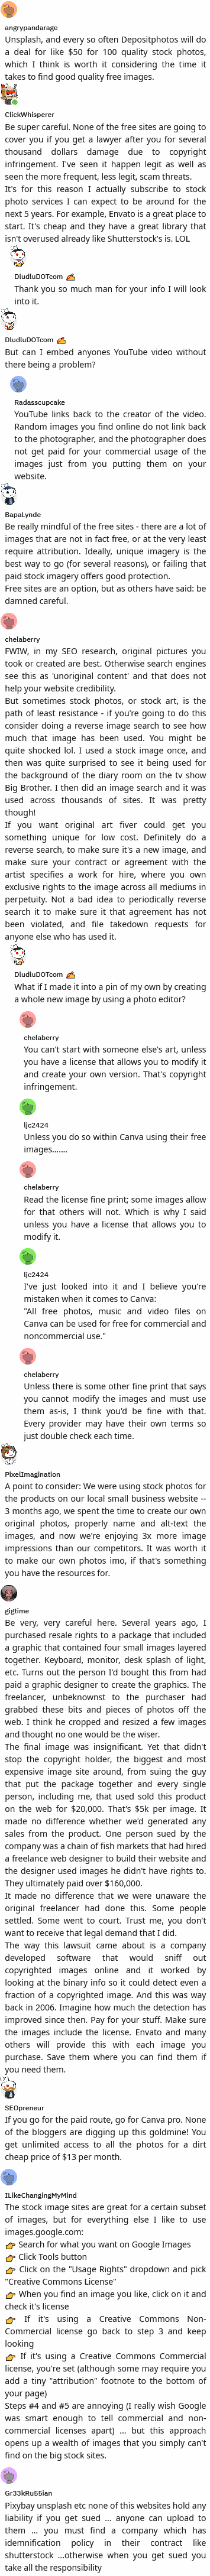 to get images pictures or photos for a website for free and preventing copyright infringement or scam attempting